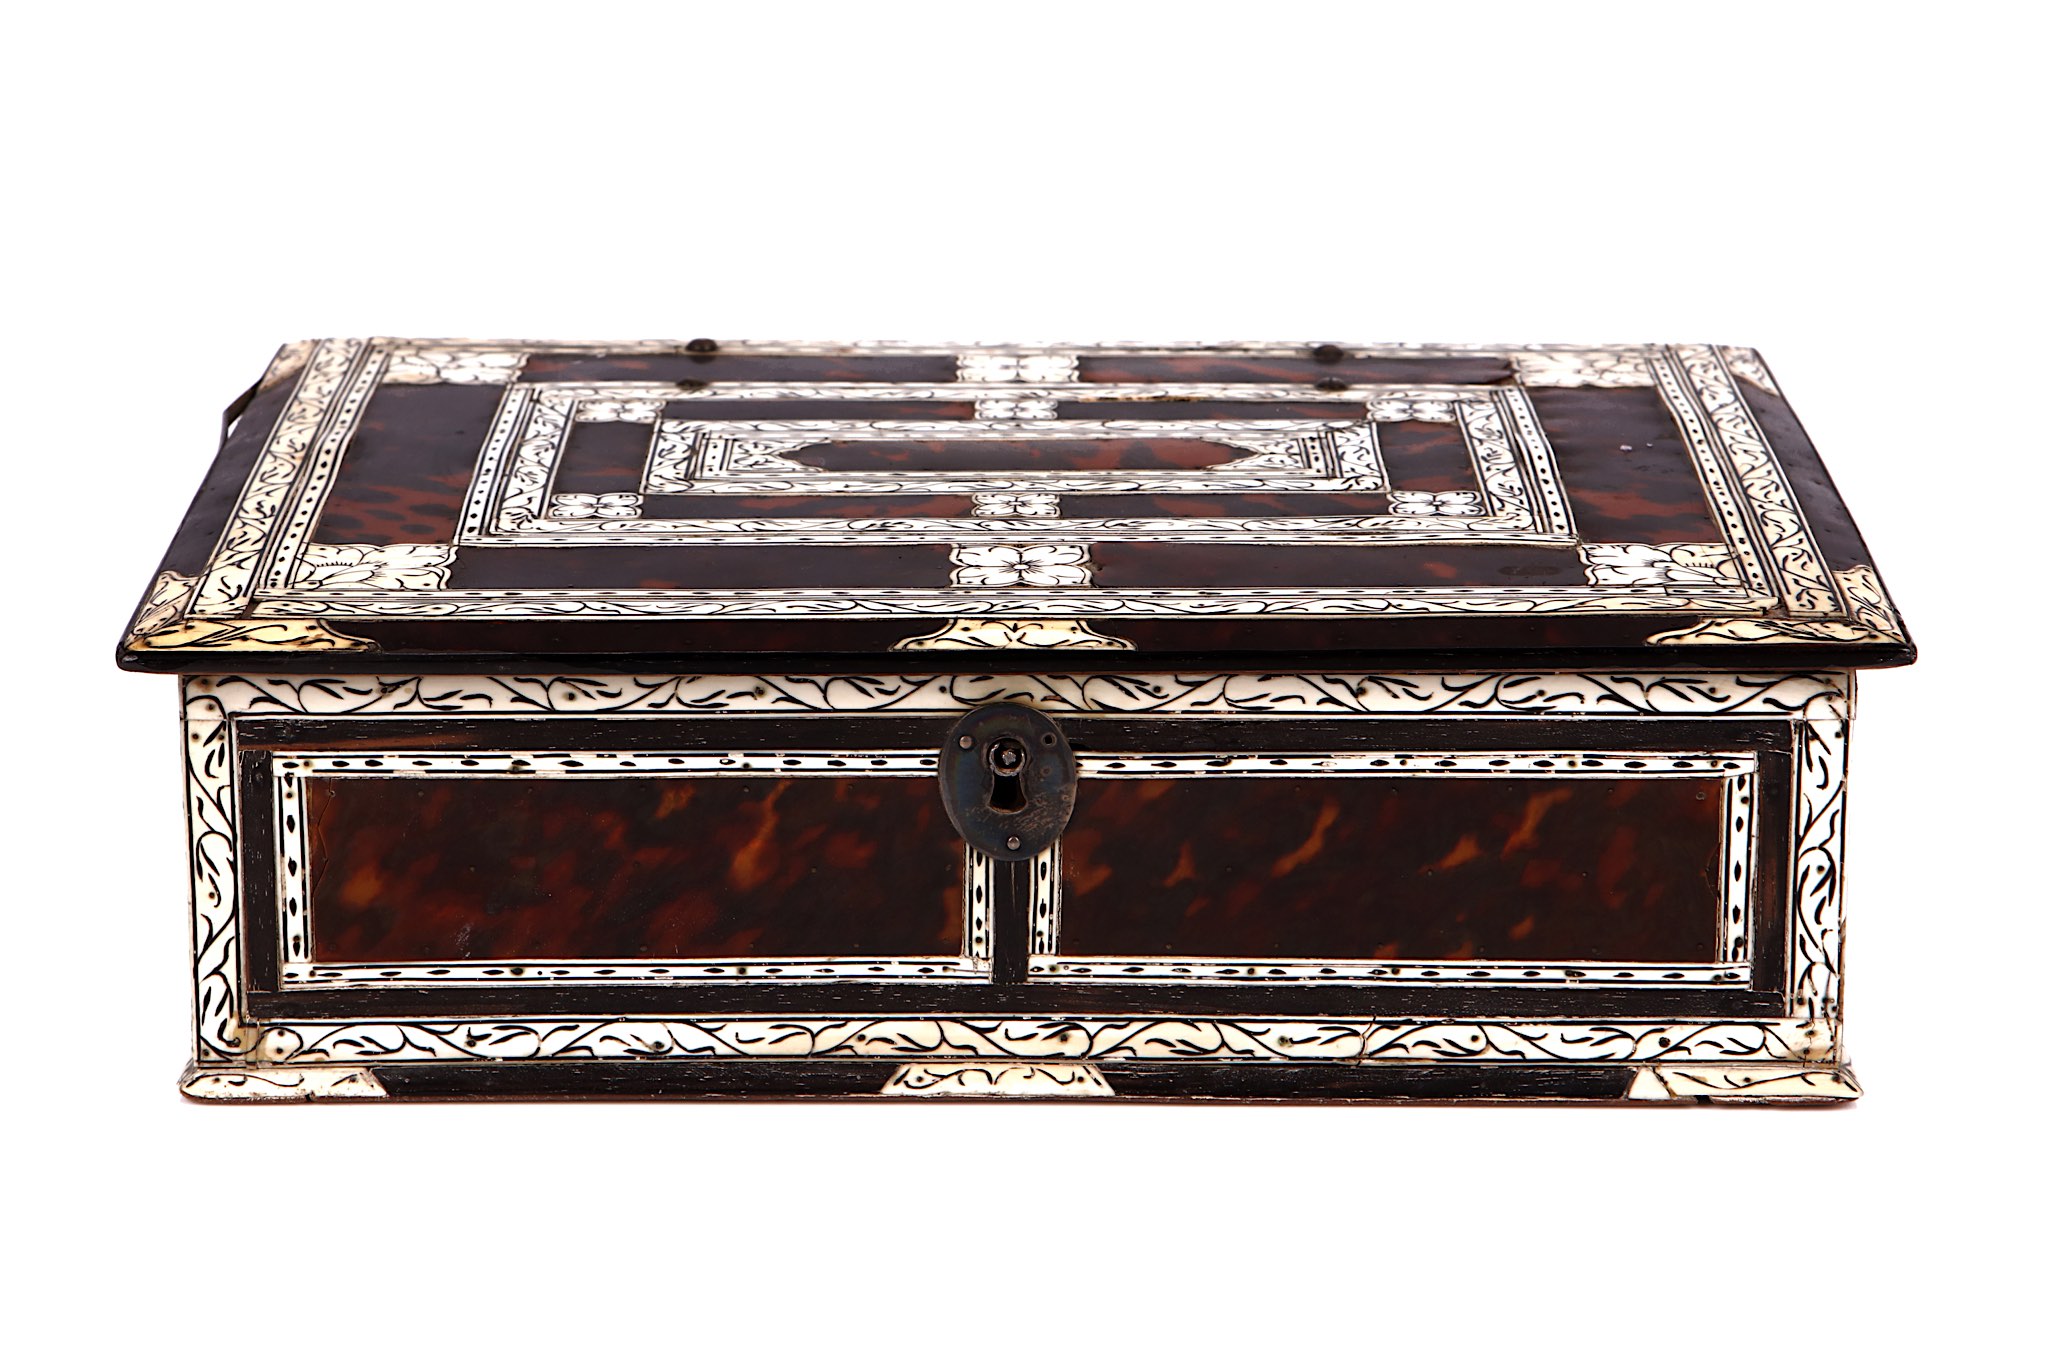 AN 18TH CENTURY INDO-PORTUGUESE TORTOISESHELL AND IVORY WRITING BOX of rectangular form, with